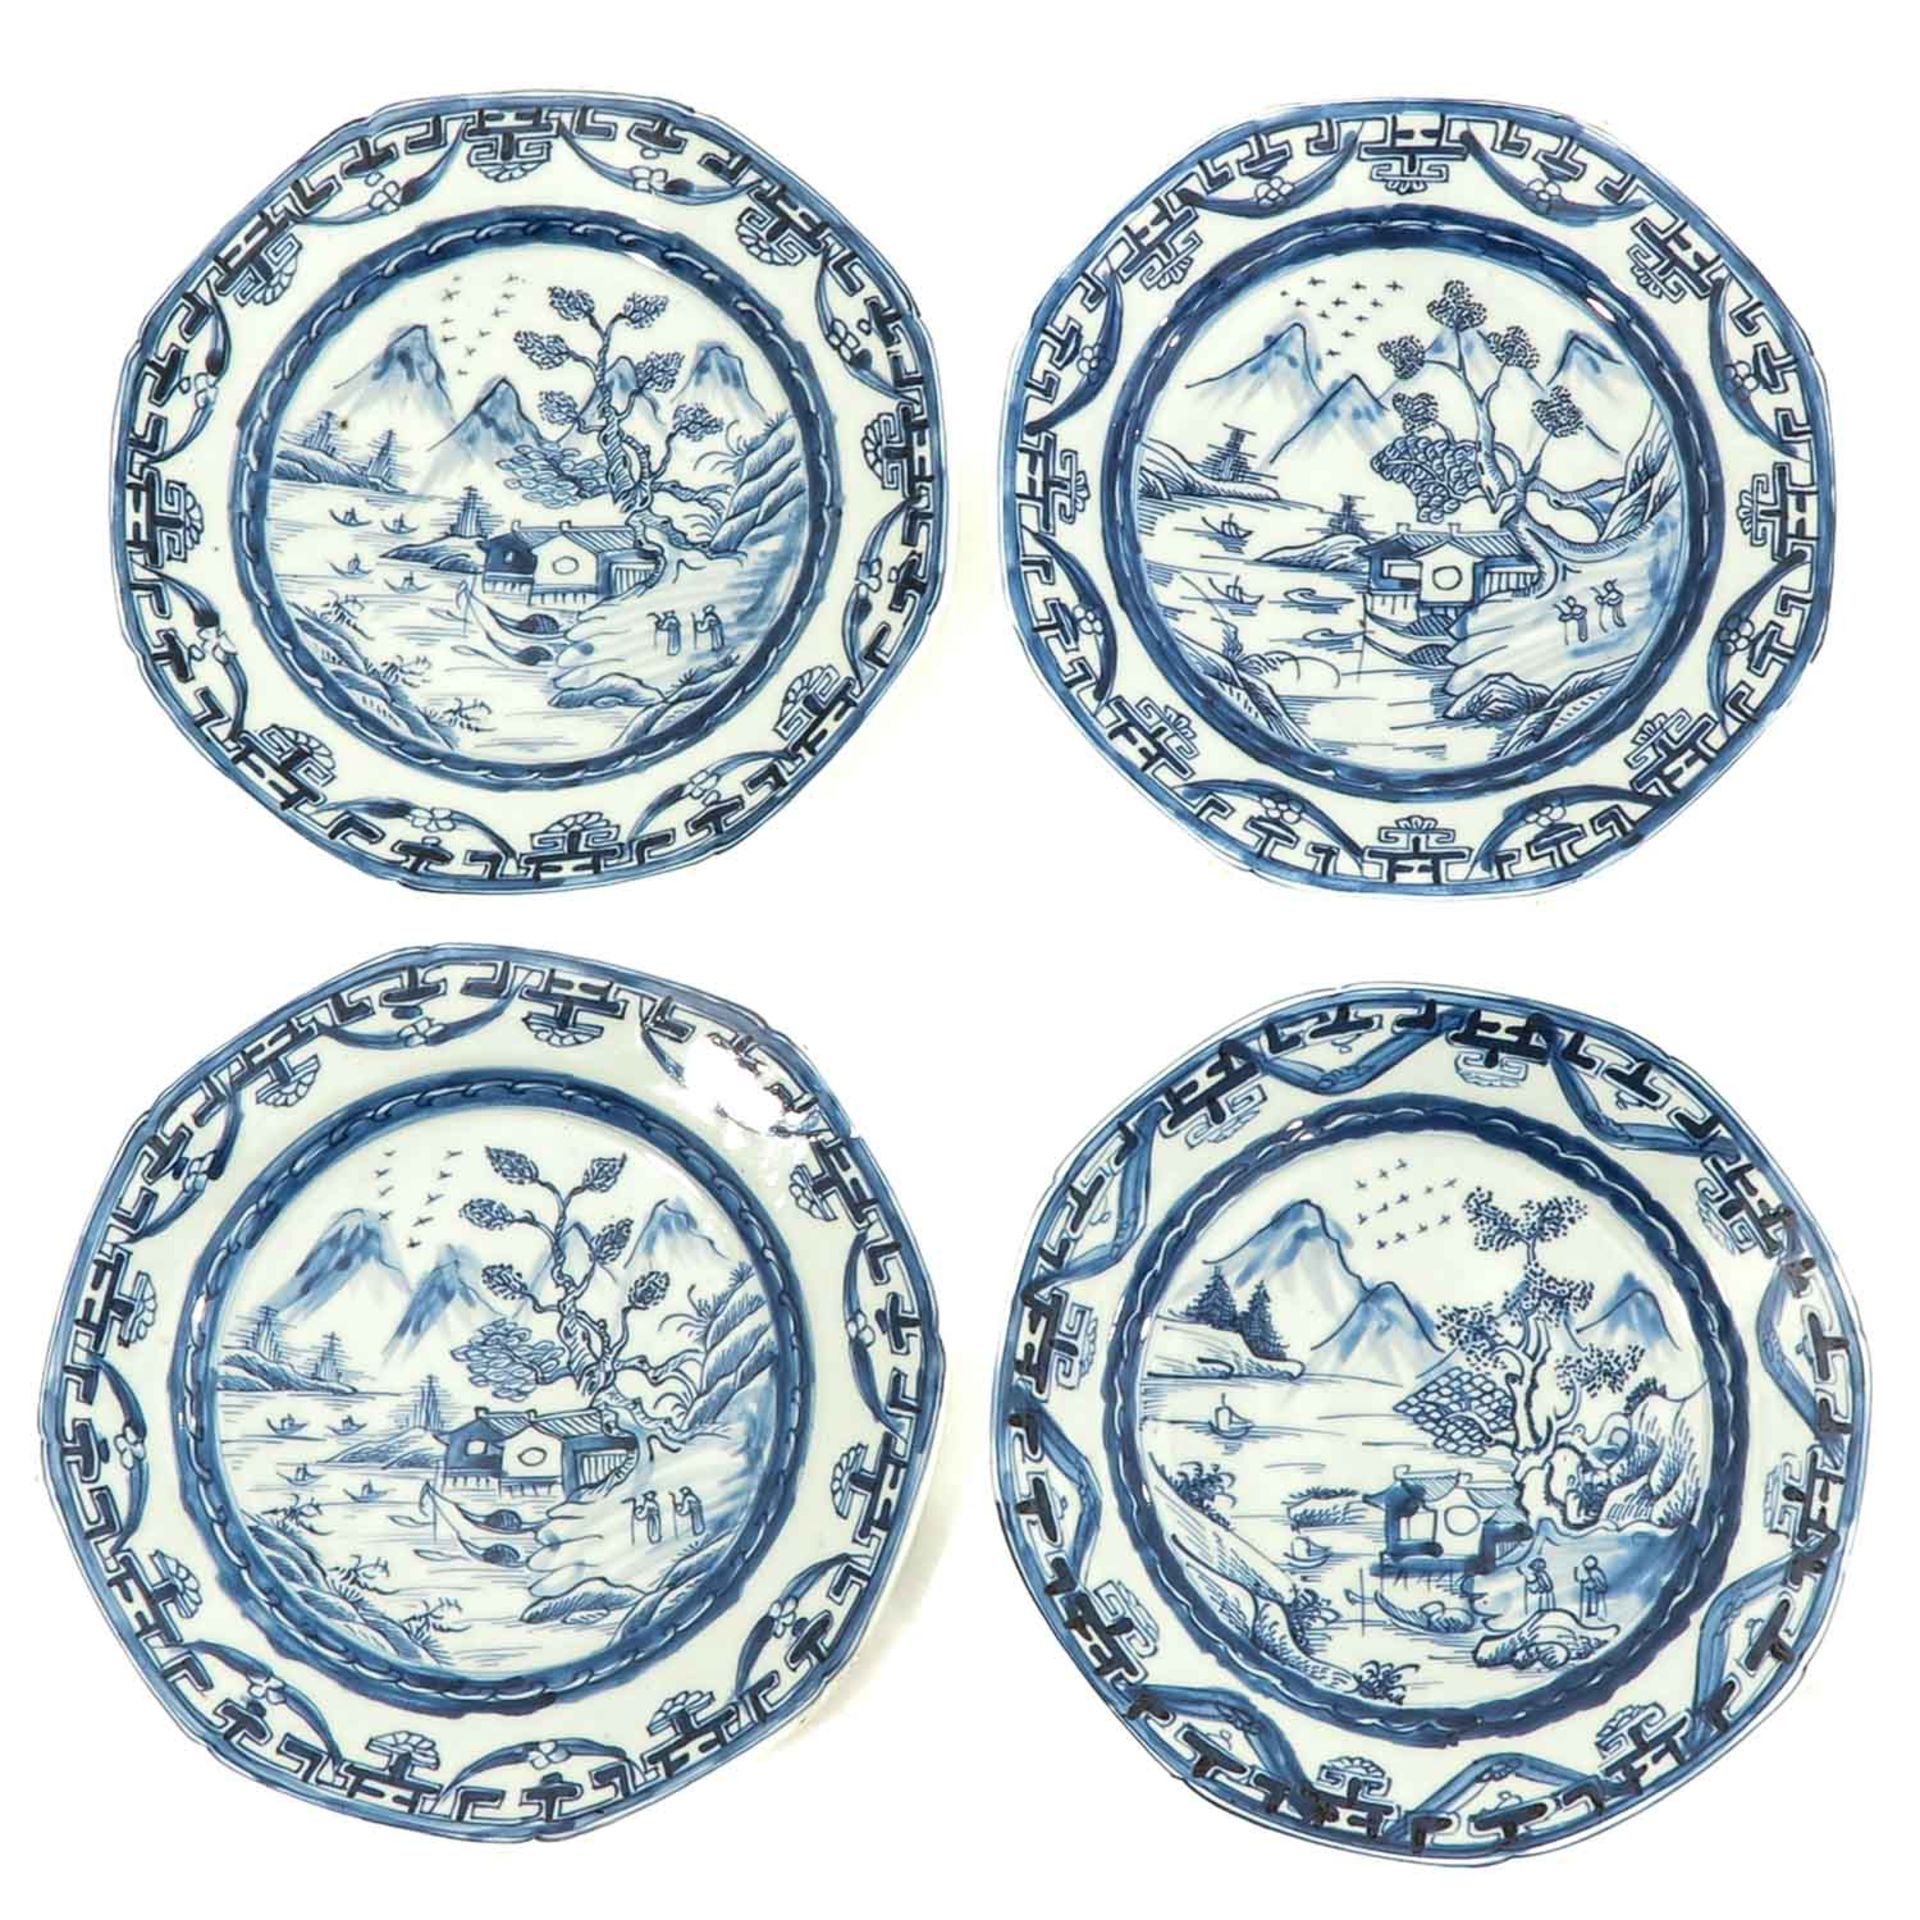 A Series of 12 Blue and White Plates - Image 3 of 10